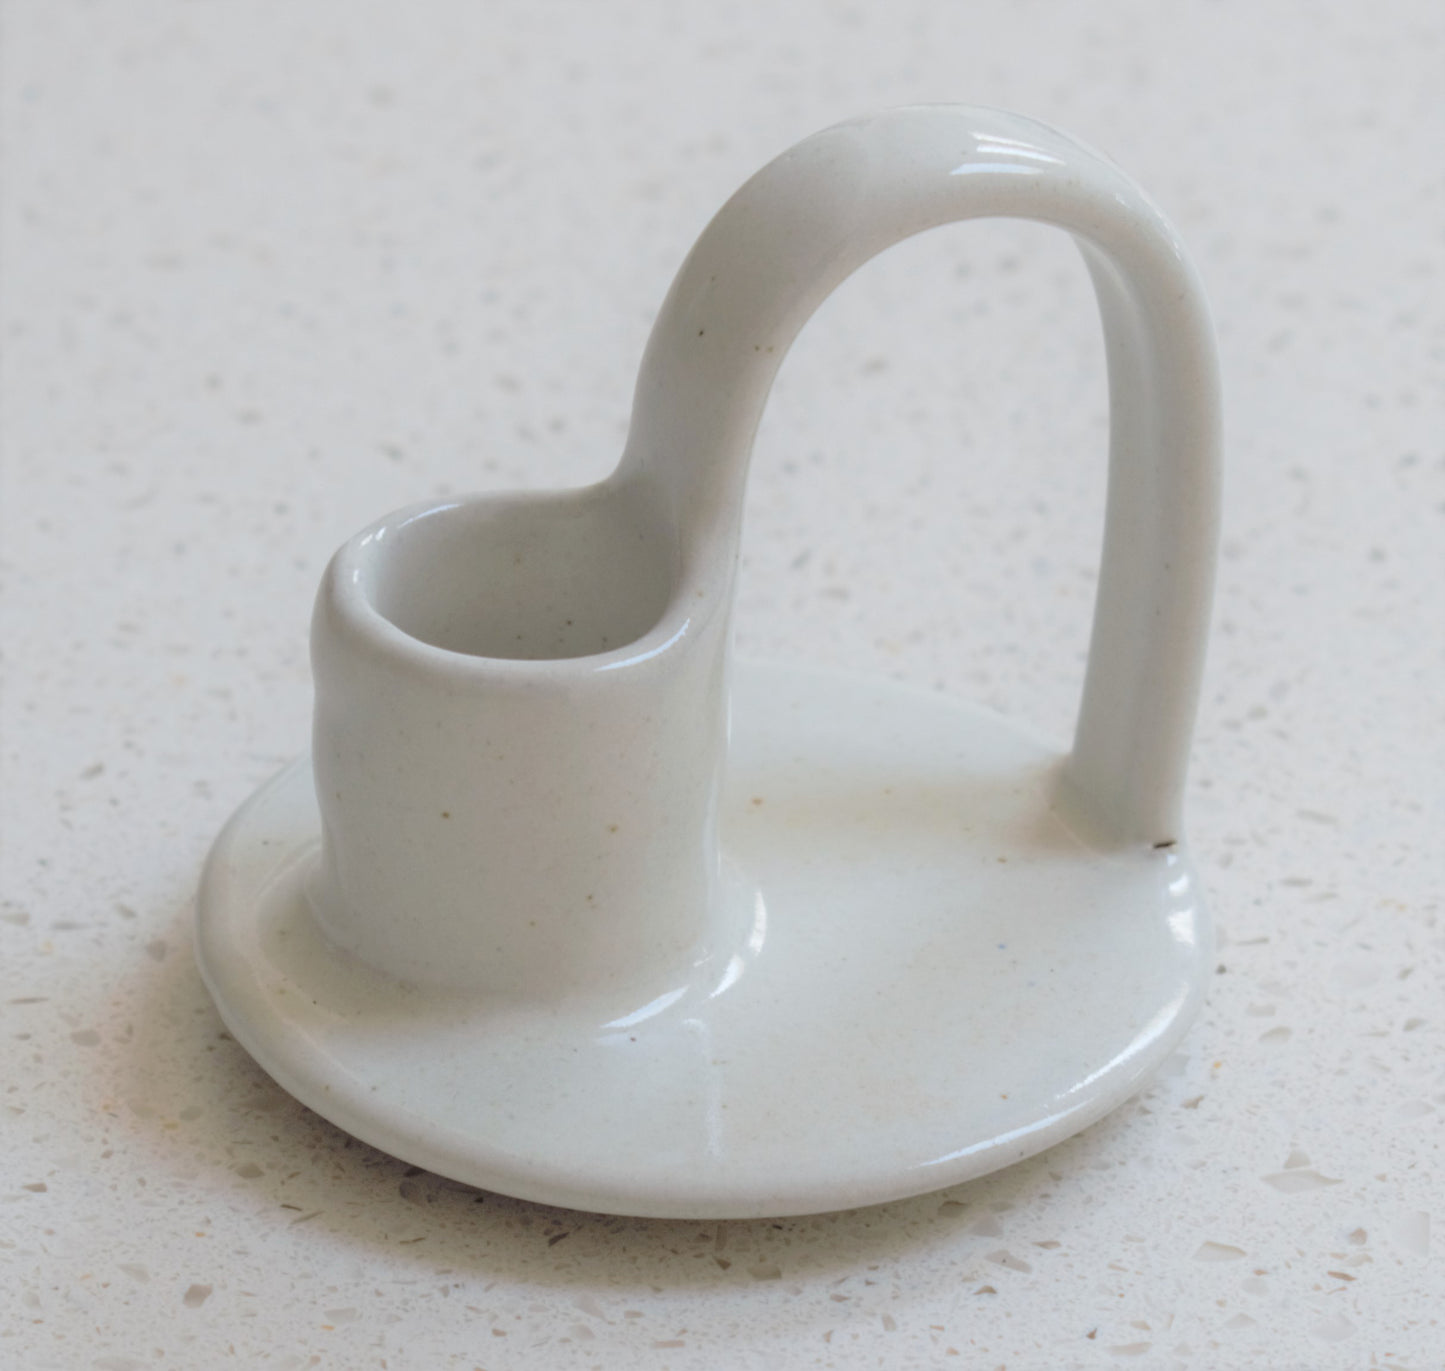 Ceramic Candle Holder with Handle